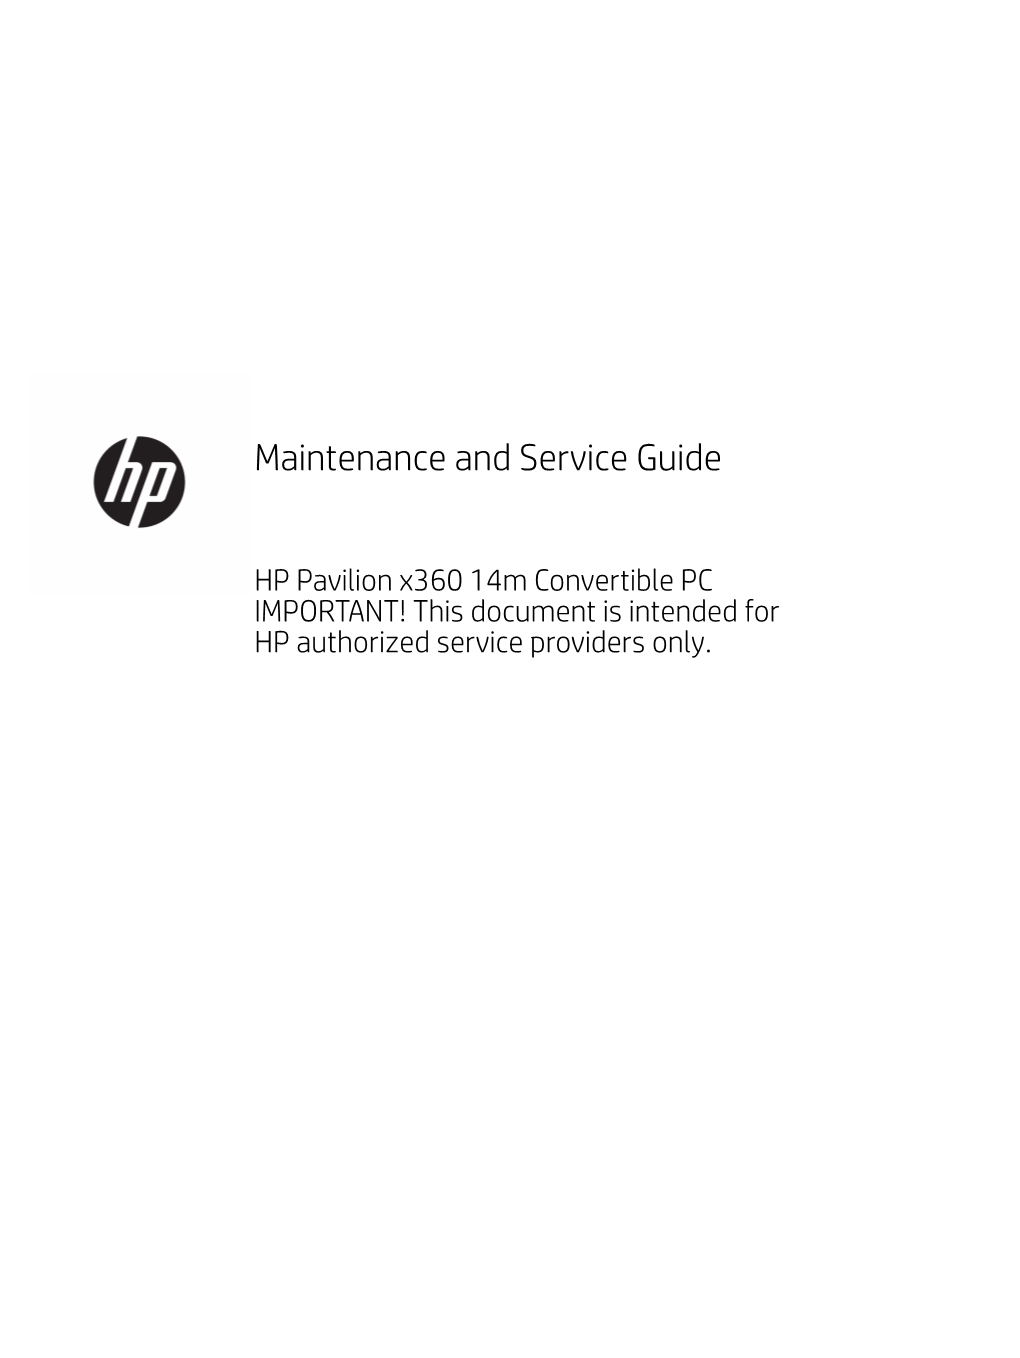 Maintenance and Service Guide HP Pavilion X360 14M Convertible